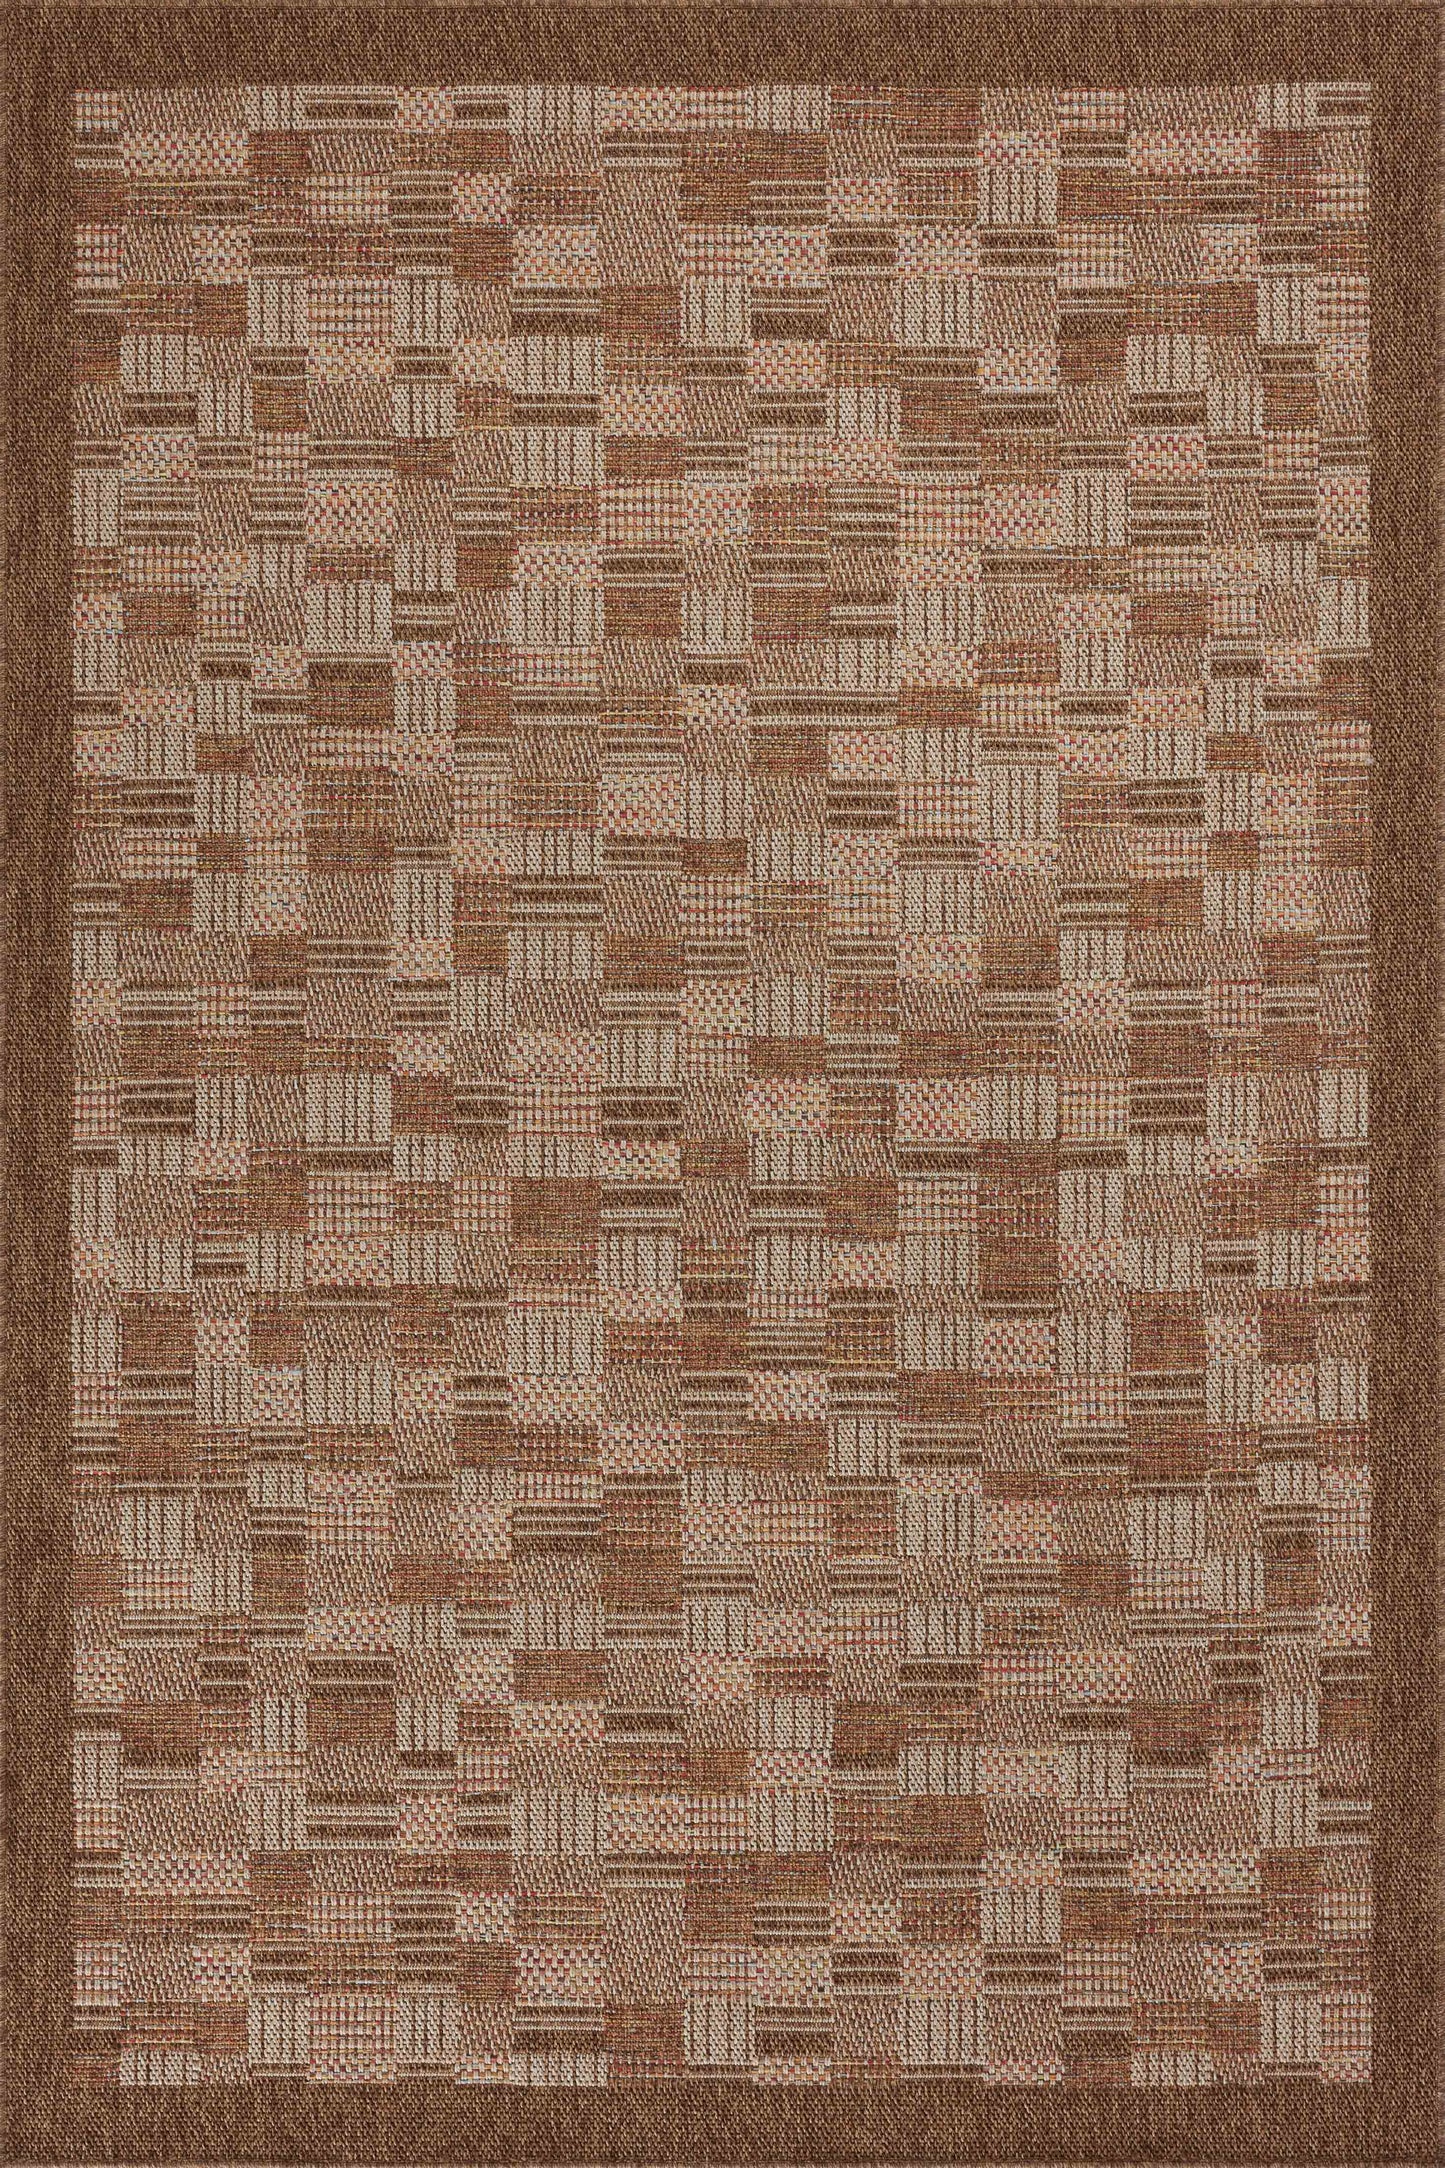 A picture of Loloi's Merrick rug, in style MER-04, color Chestnut / Fiesta